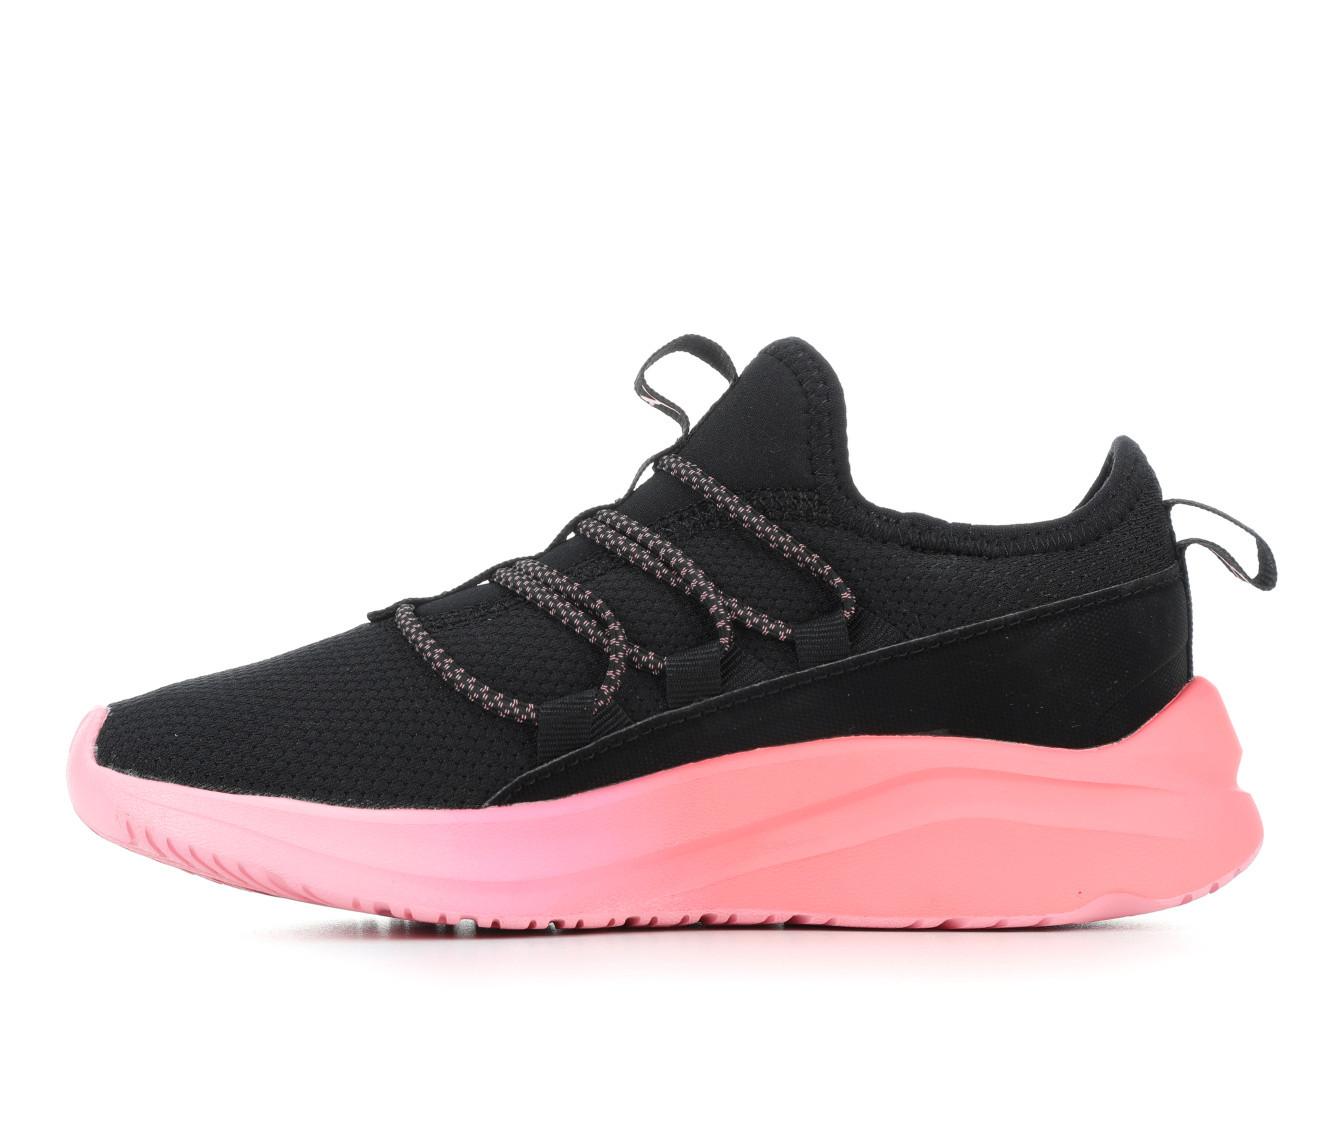 Girls' Puma Little Kid SoftRide One4All Sorbet Running Shoes